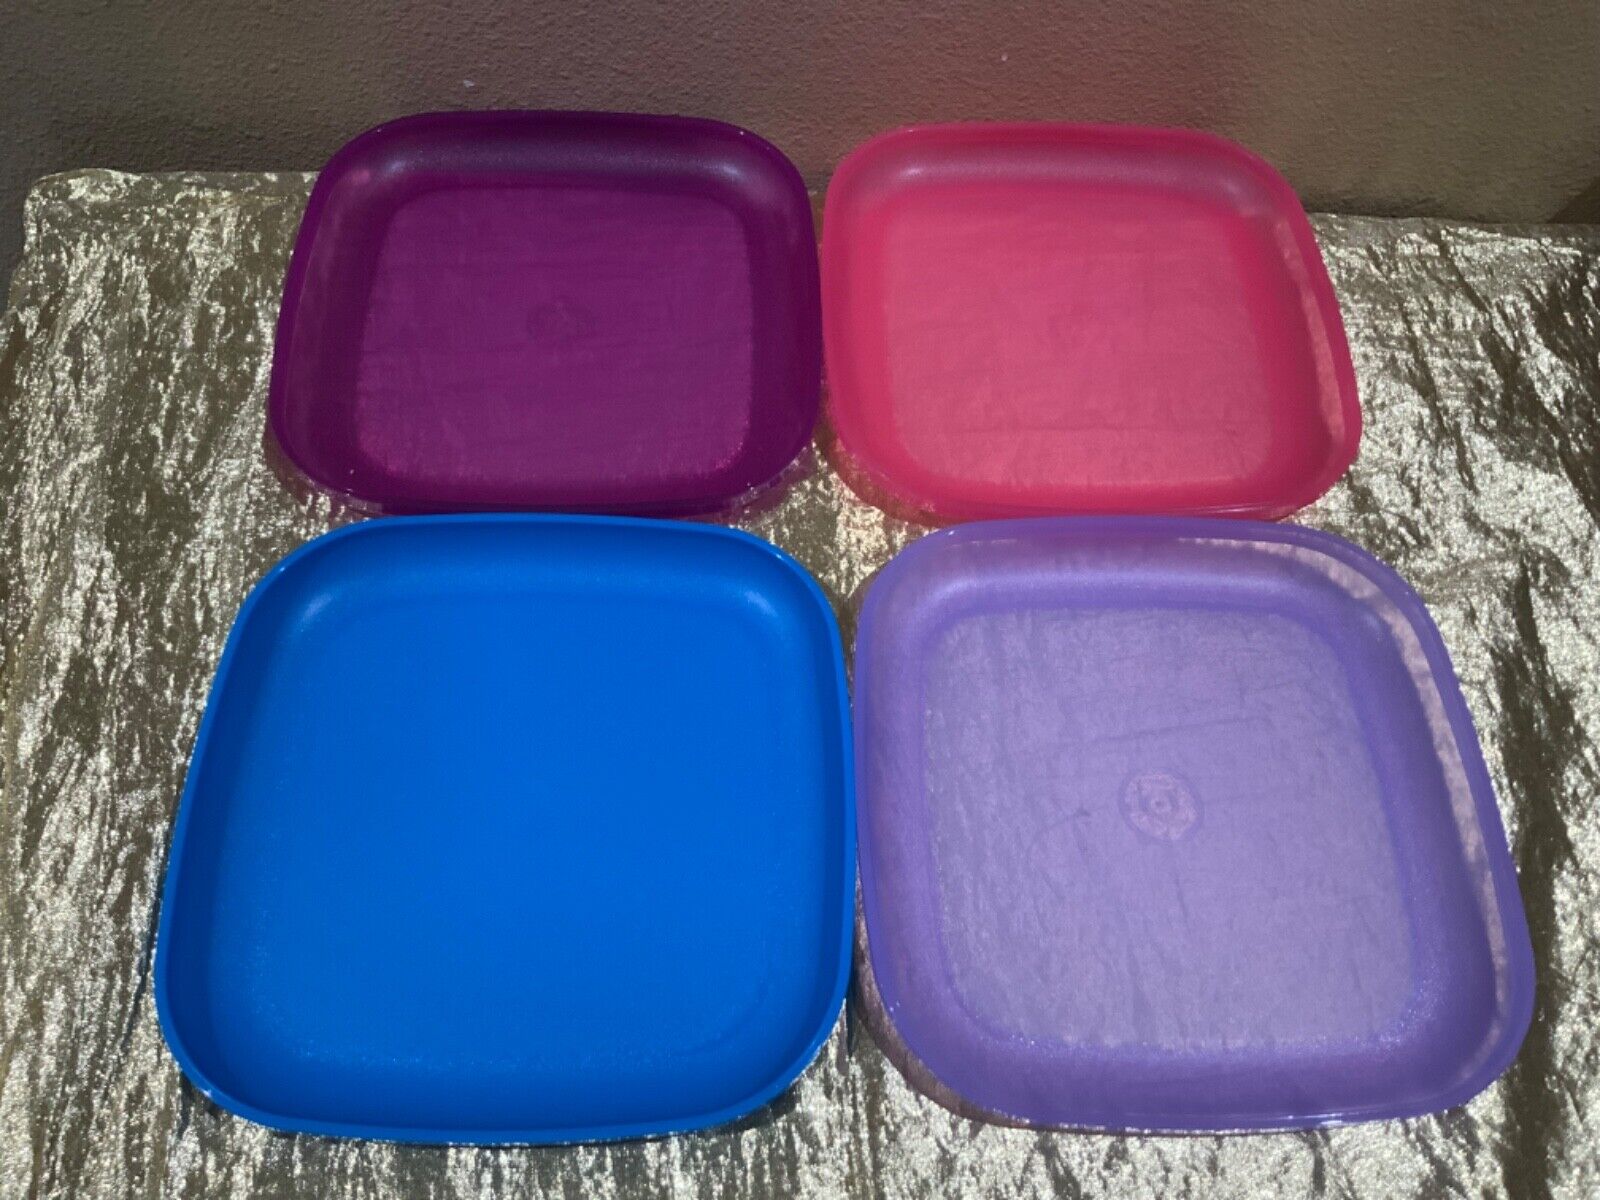 New Set 4 Tupperware Luncheon Plates 8” Square Raised Sides Beautiful & Colorful